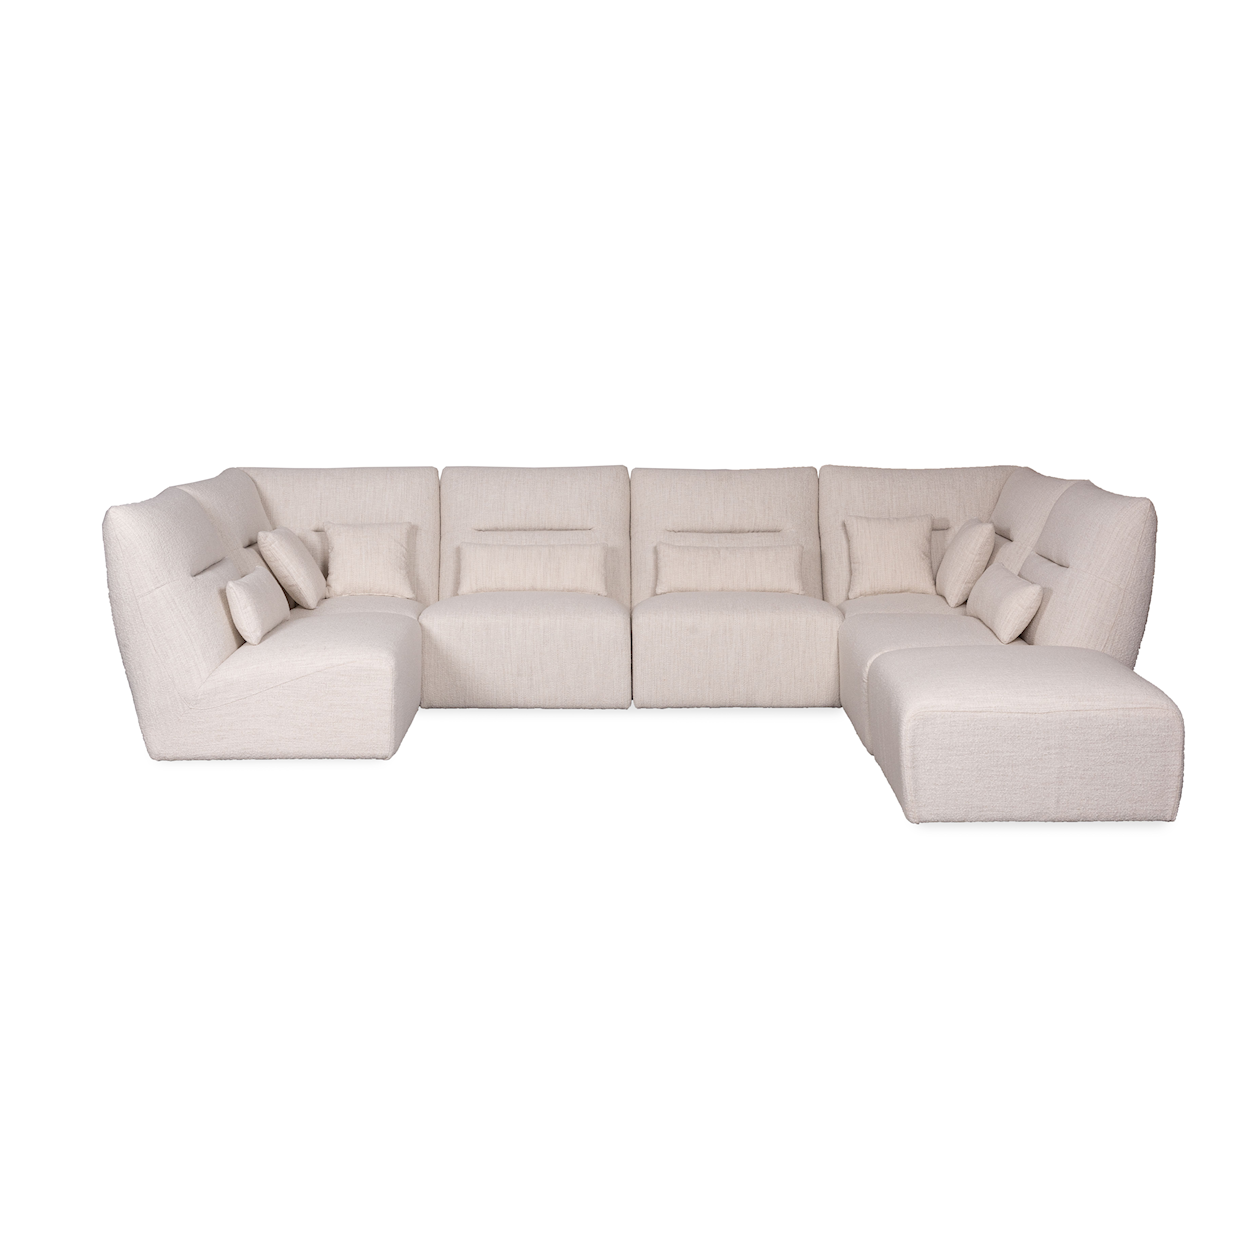 Synergy Home Furnishings 5047 6-Piece Sectional 